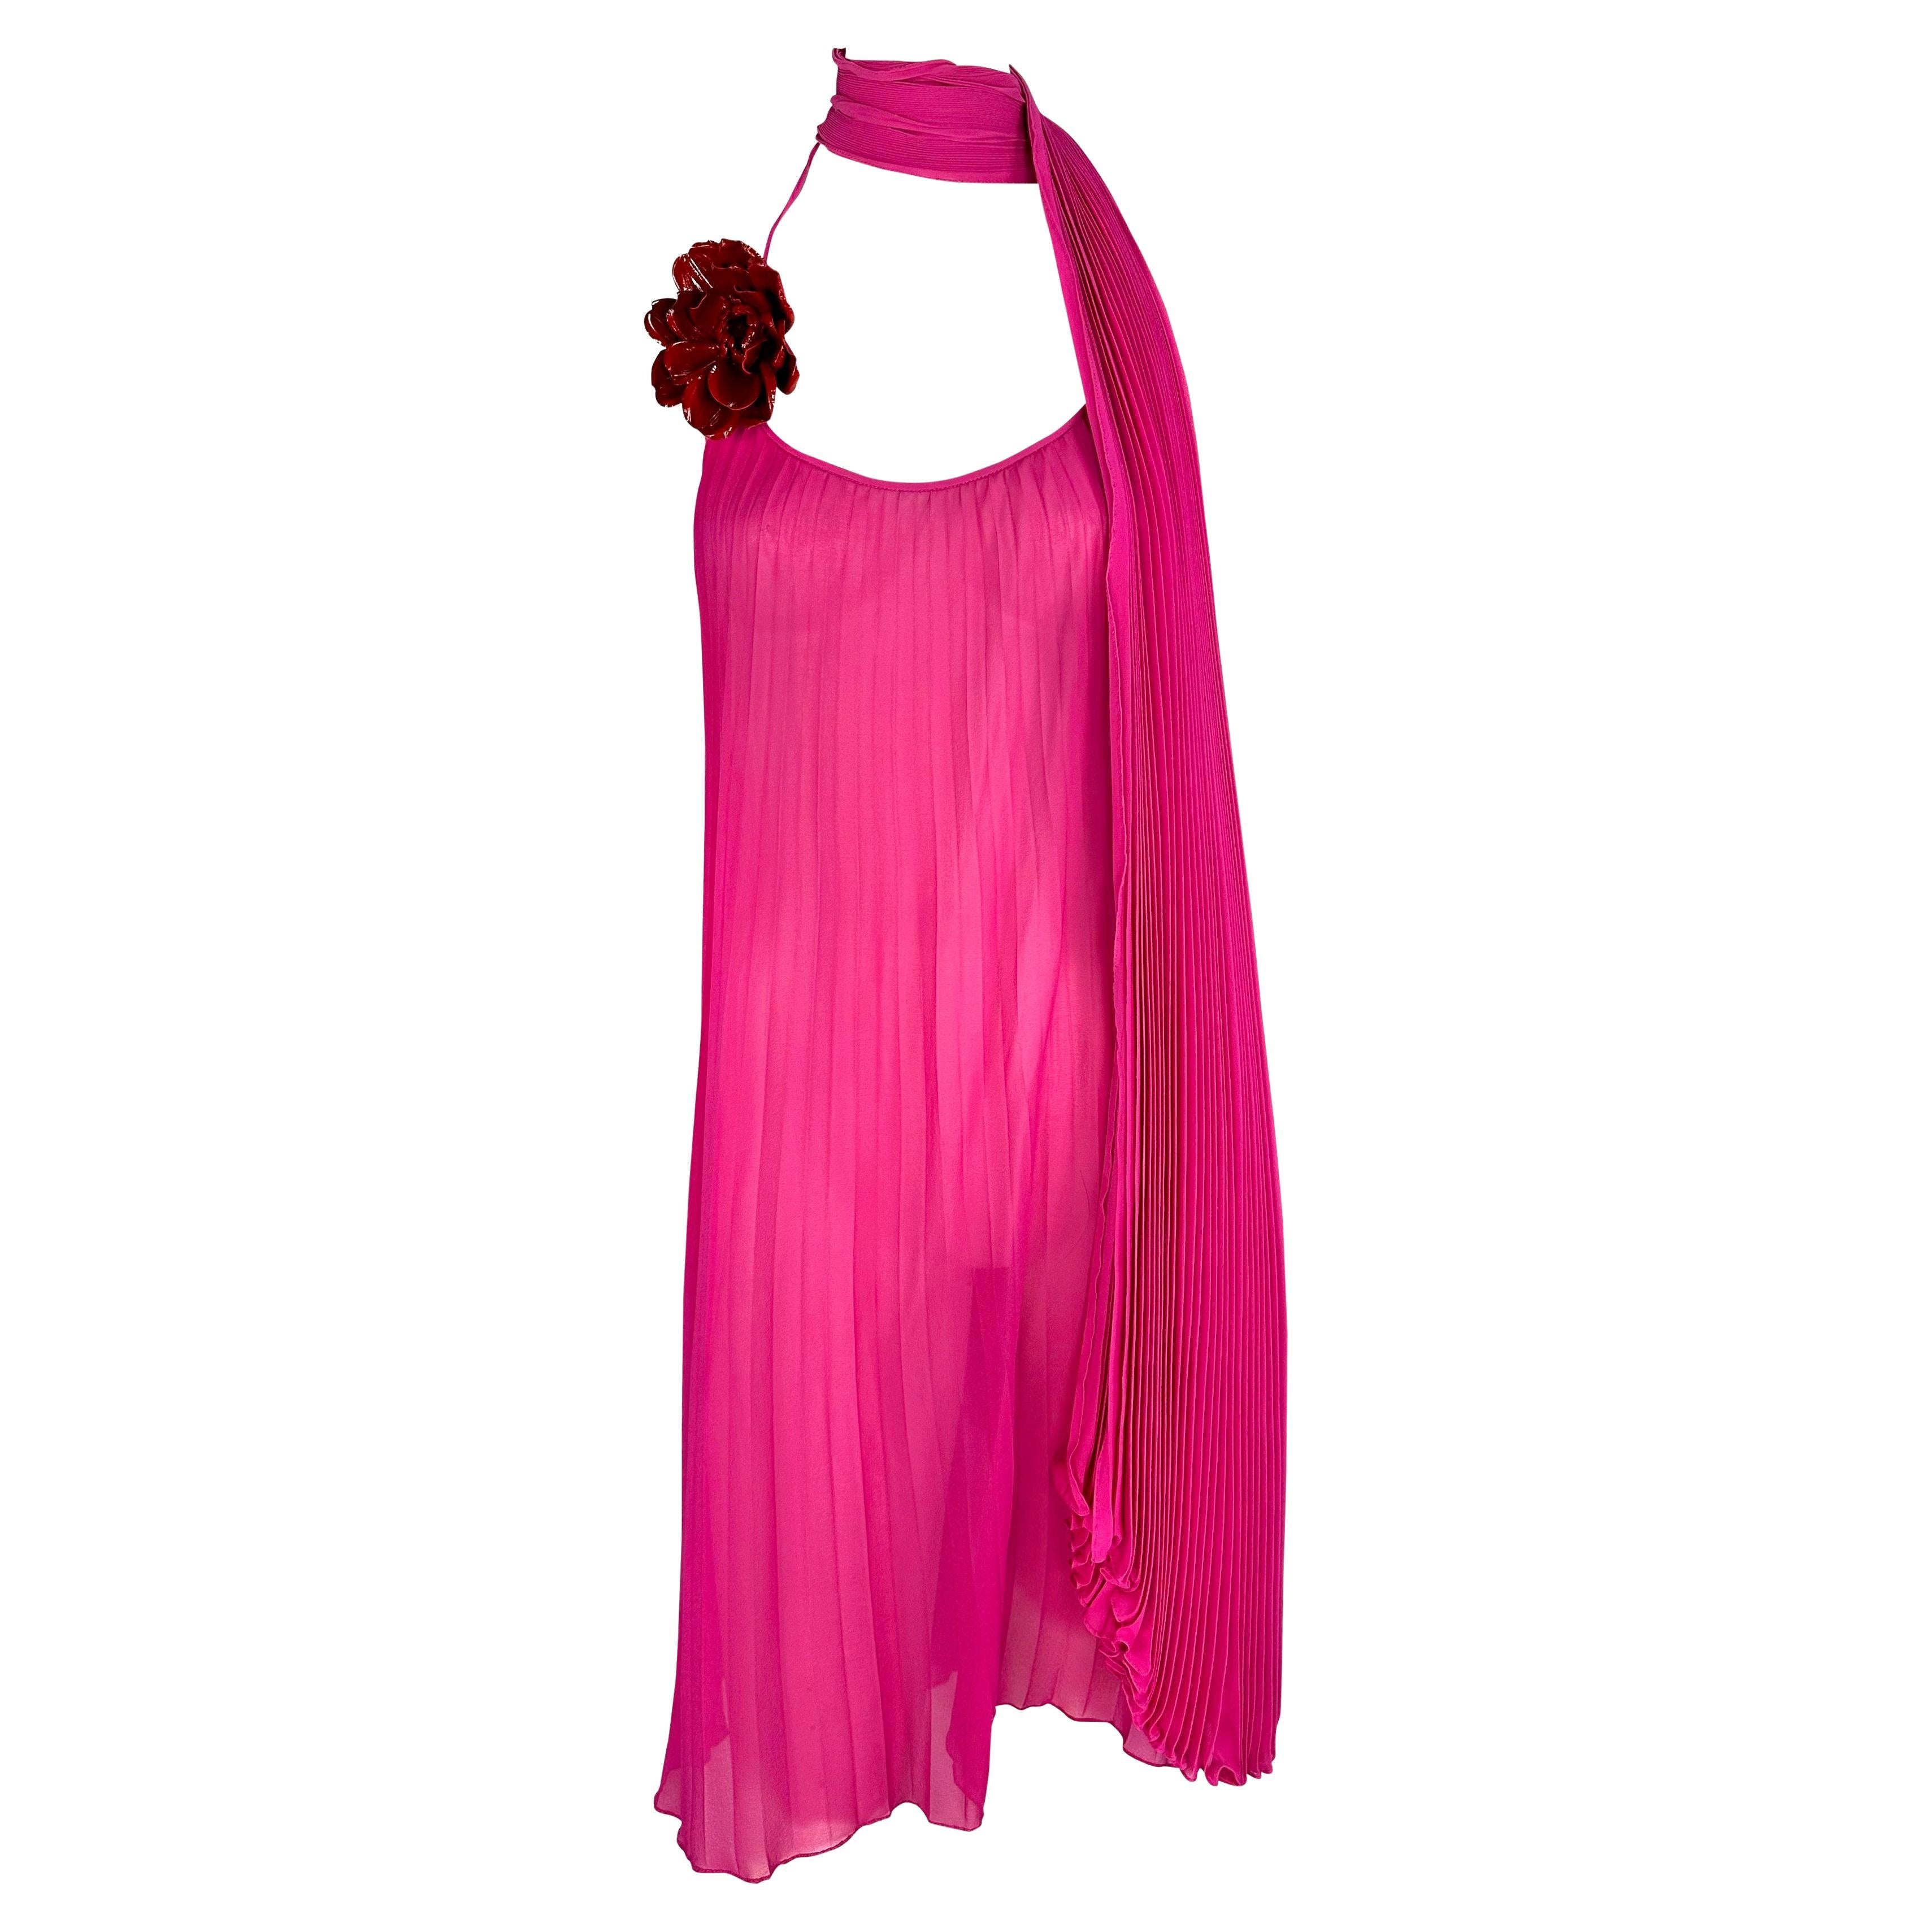 F/W 2000 Dolce & Gabbana Sheer Hot Pink Pleated Chiffon Floral Appliqué Dress For Sale